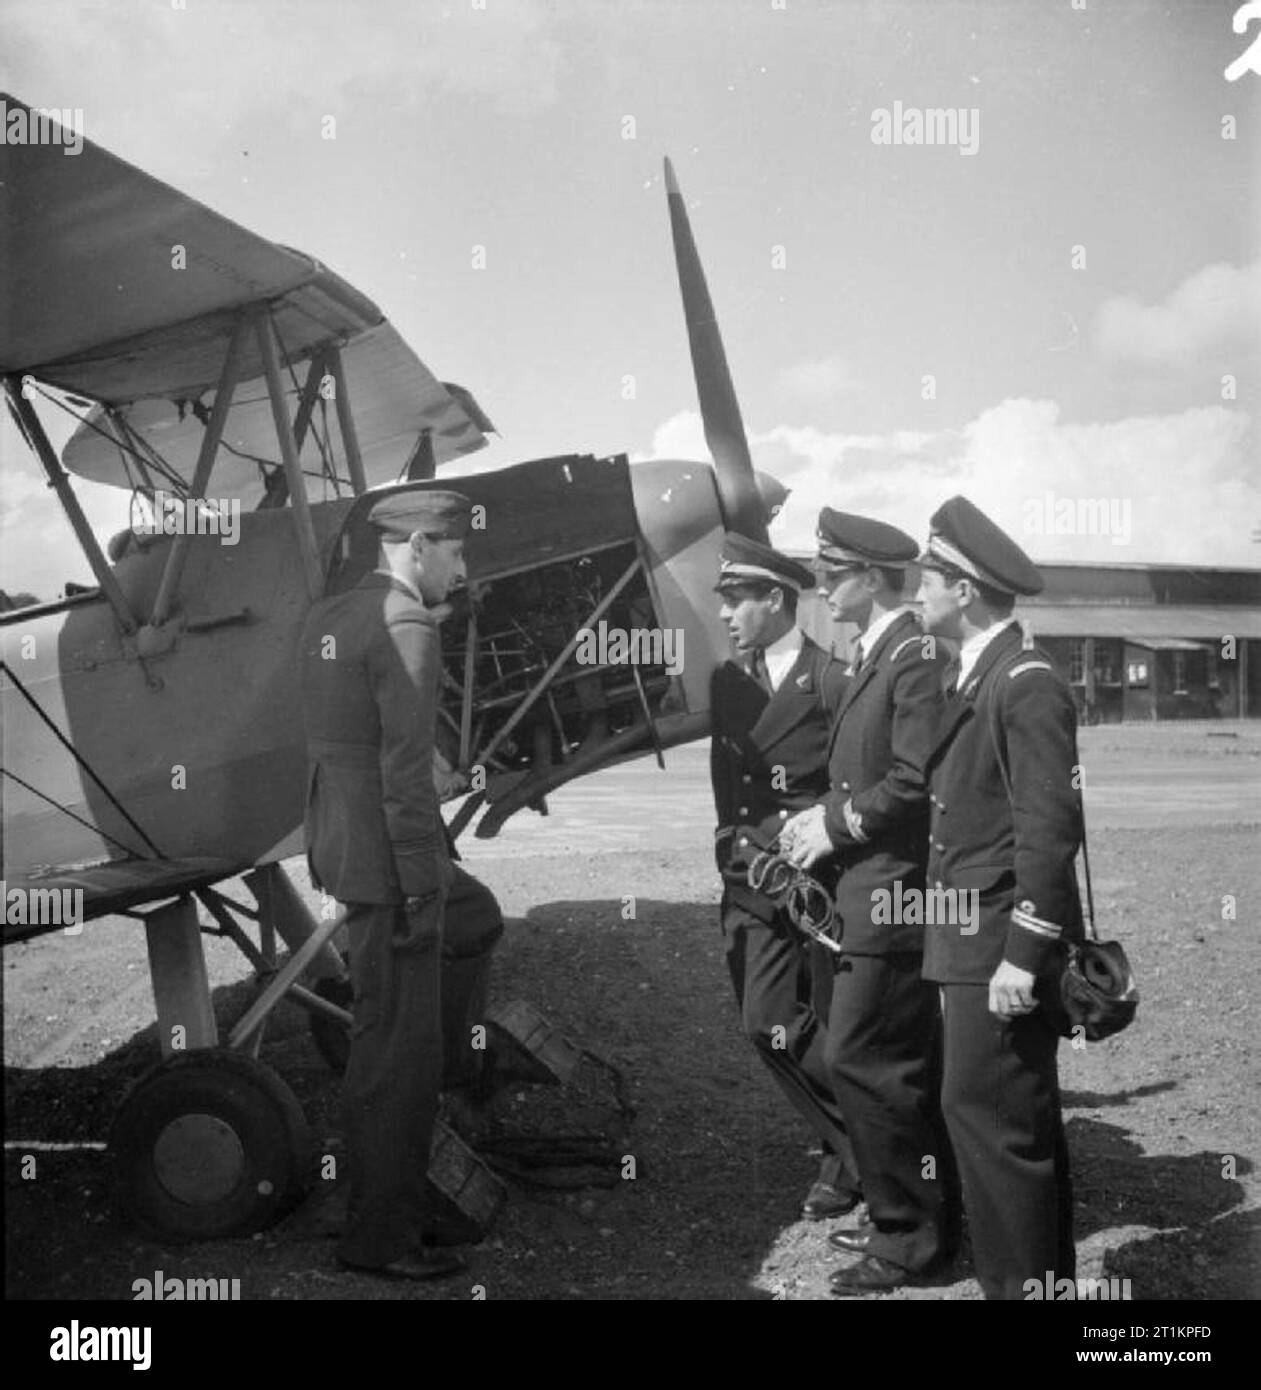 Persian Airmen Train in Britain, 1944 Three Persian airmen chat to a member of the Royal Air Force beside an aircraft. The Persian men are Lieutenant Mohamad Khatami from Rasht, Lieutenant Ahmed-Ali Jahanbin from Tehran and Lieutenant Nasrollah Shahrokay, also from Tehran. According to the original caption, Lt Shahrokay's father is Iranian Minister in Moscow. Stock Photo